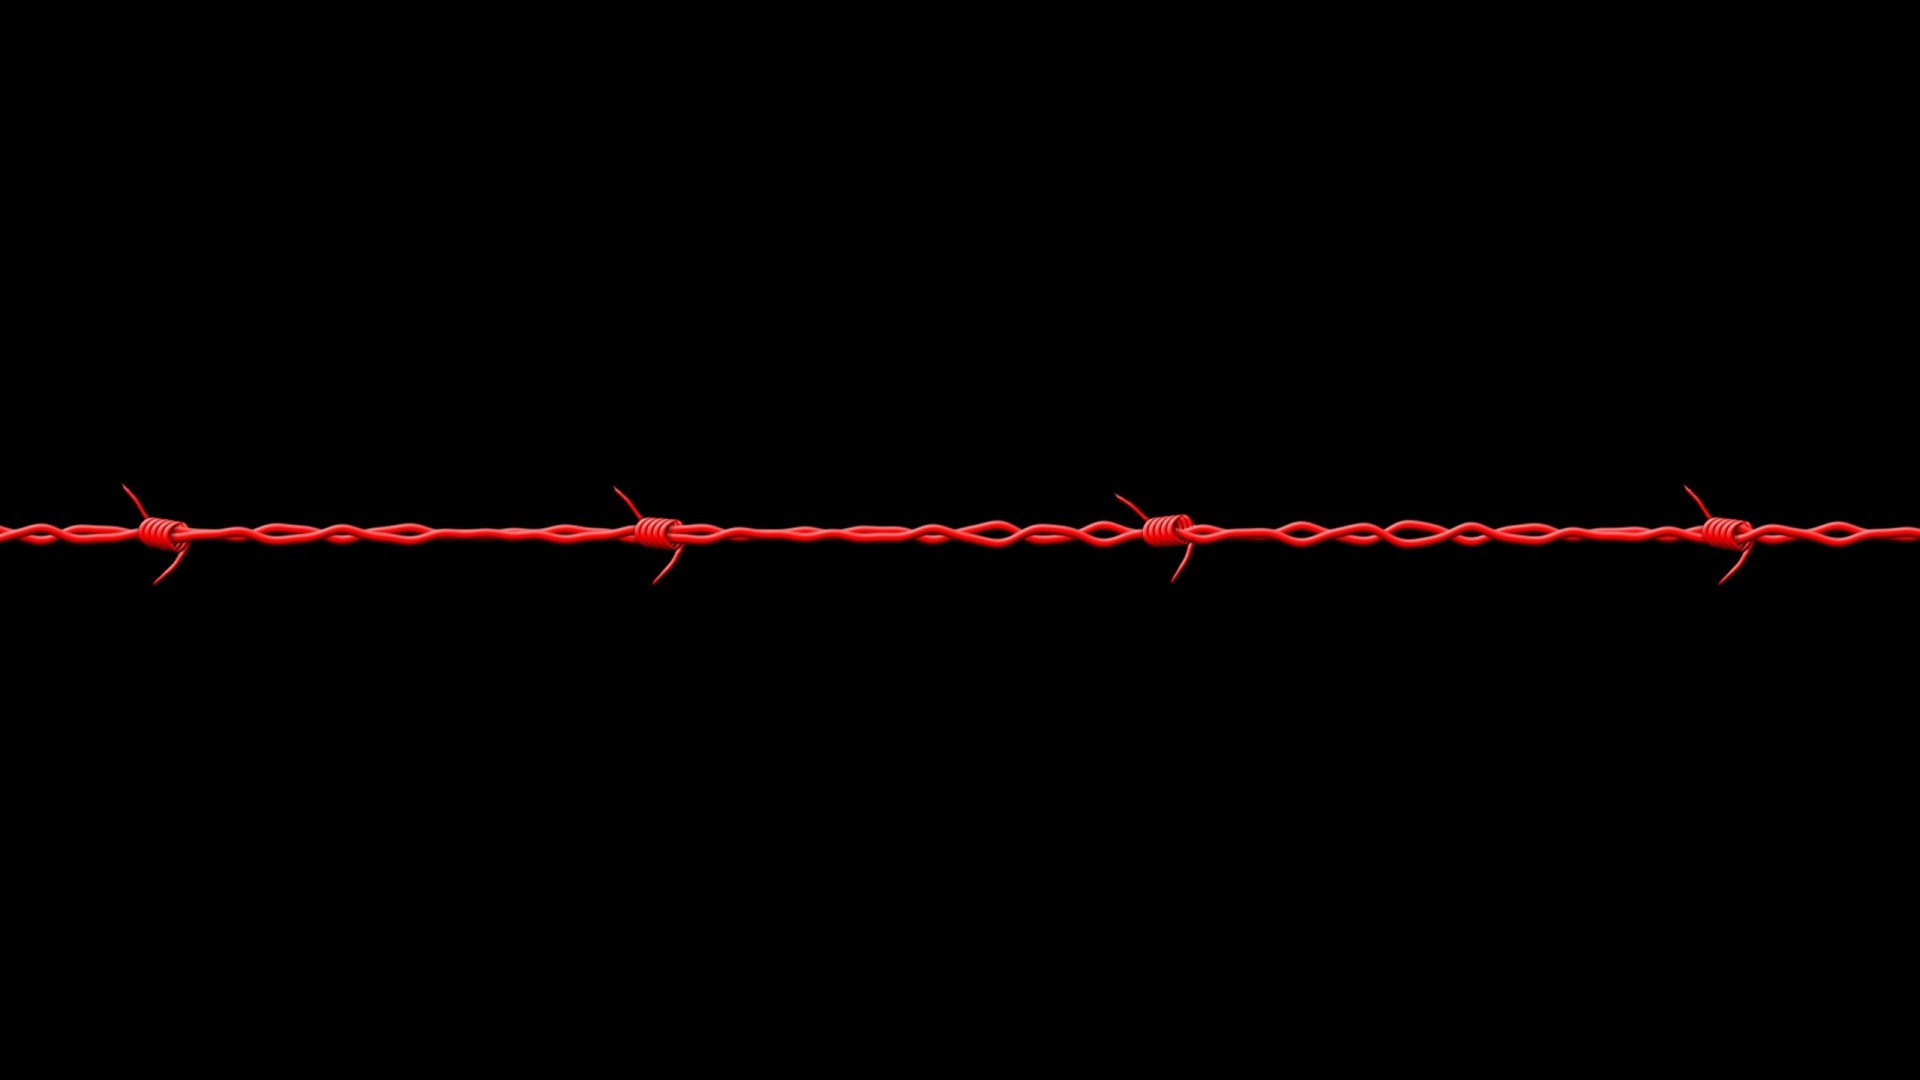 Wallpaper black, barbed wire, red